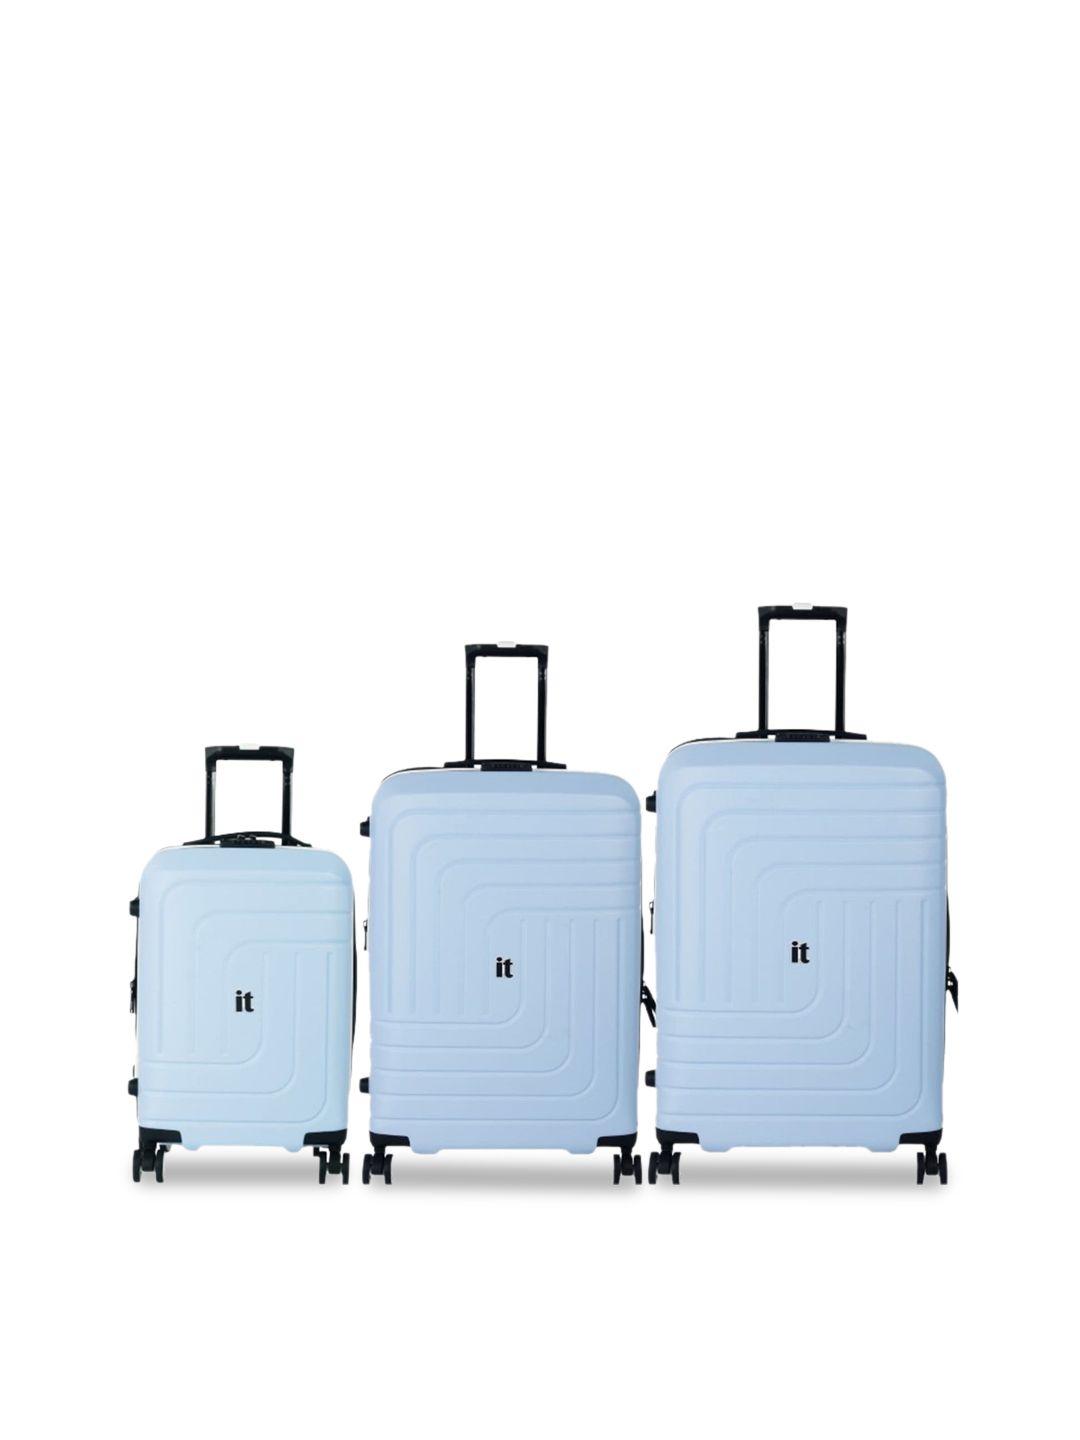 IT luggage convolved Set Of 3 Hard-Sided Trolley Suitcases Bags-50.8,60.96,71.12cm